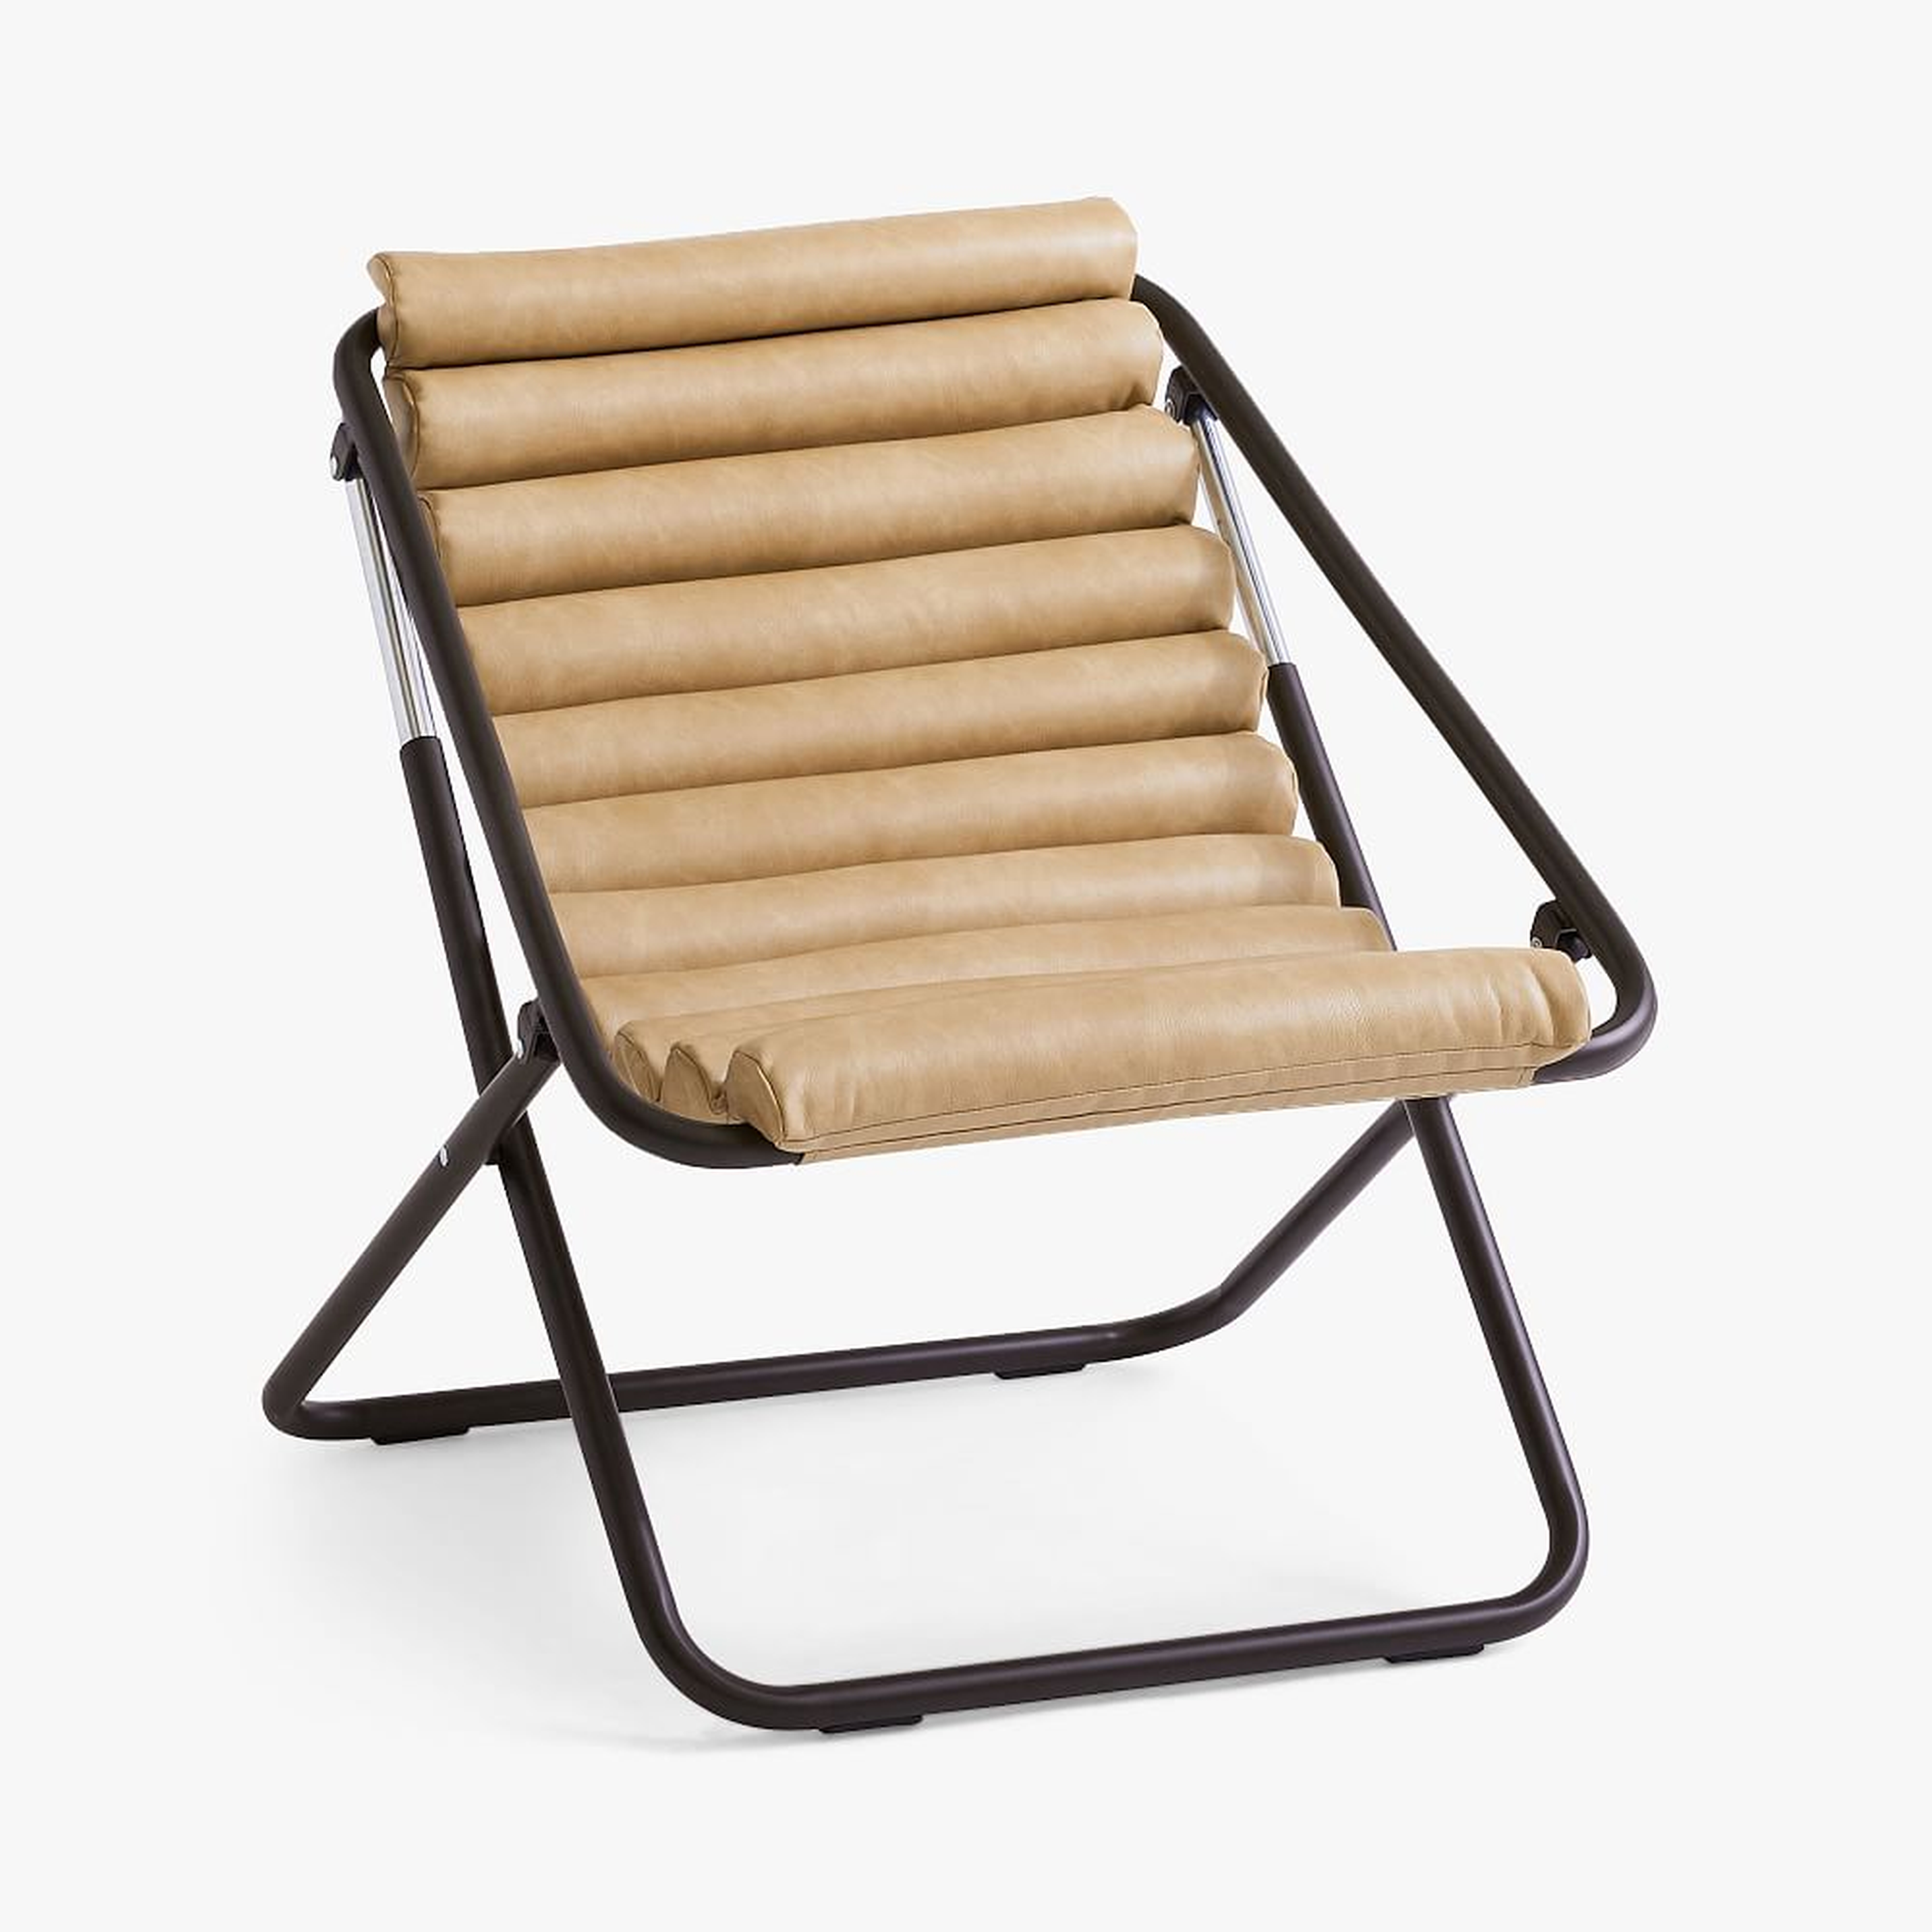 Vegan Leather Cream Channeled Sling Chair - Pottery Barn Teen